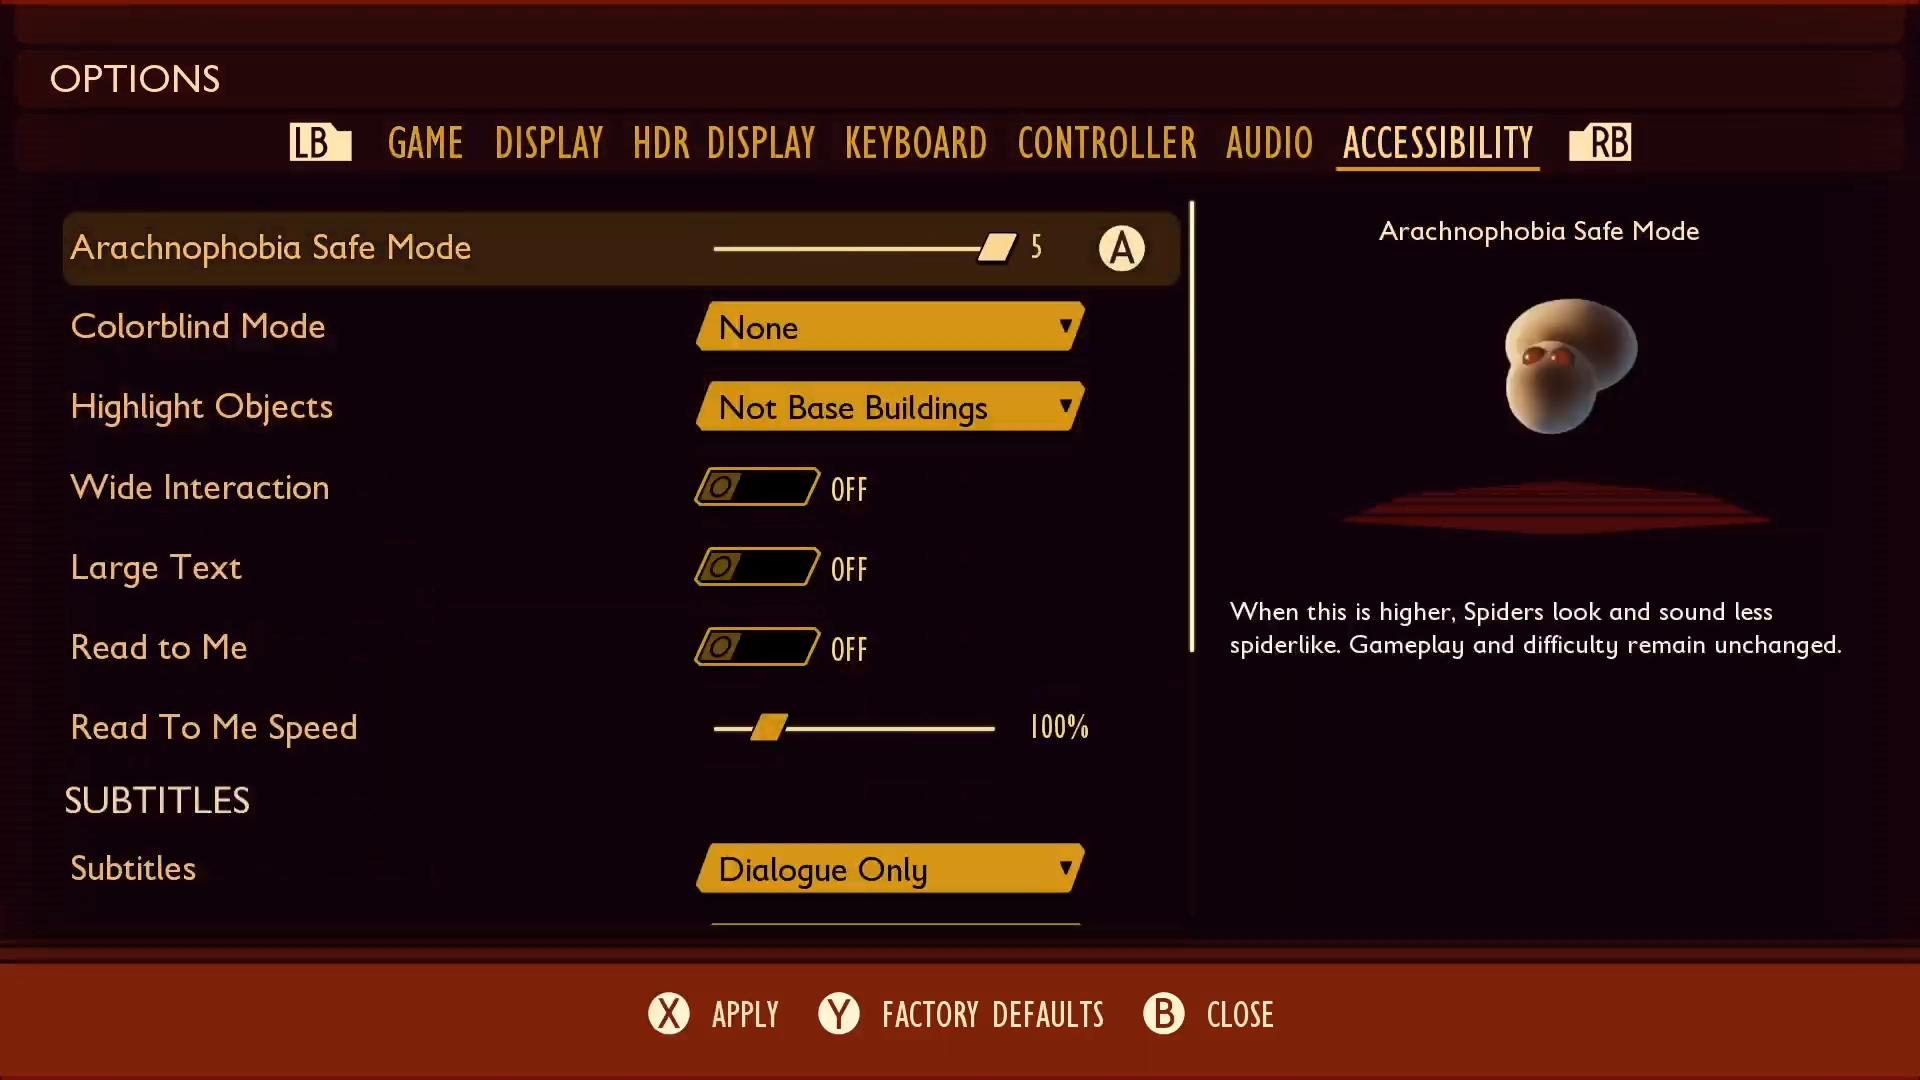 Grounded Options menu highlighting the Arachnophobia safe mode setting, which is set to the maximum of 5. To the right is a preview of a spider with this setting looking like two floating circles with no legs."